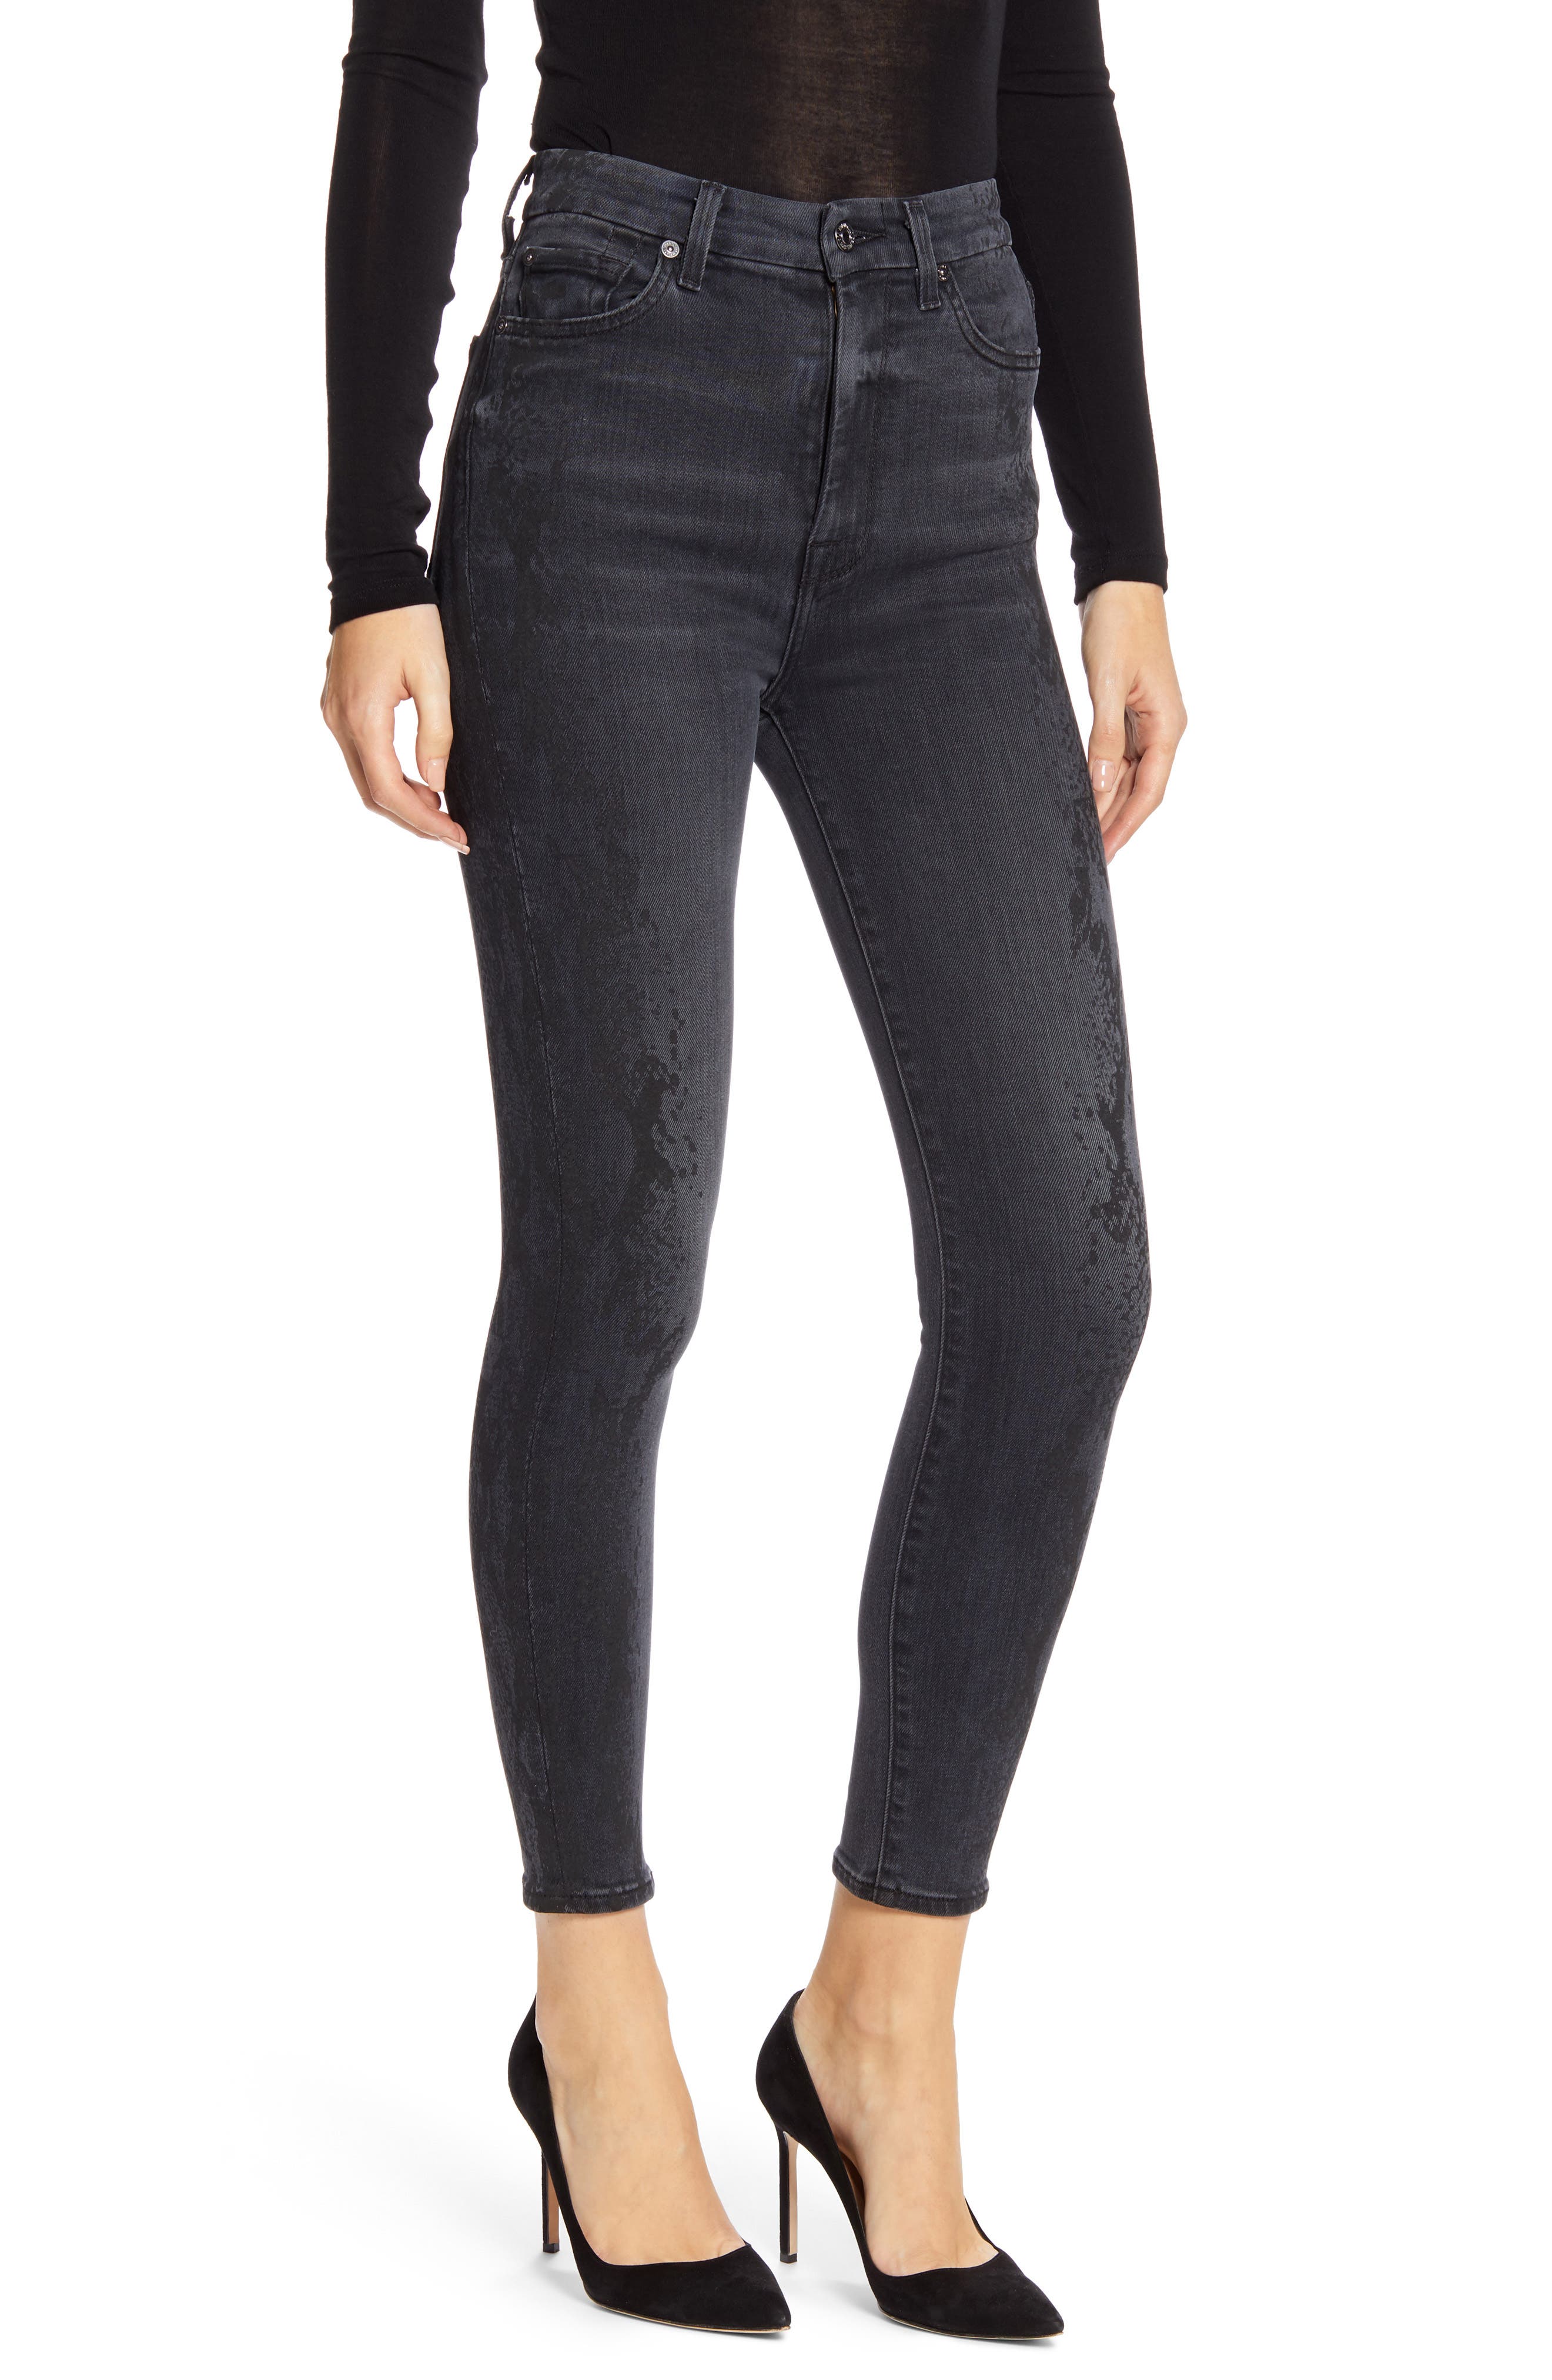 Seven 7 For All Mankind Roxanne Womens Skinny Black Jeans Crystal Squiggle 25 